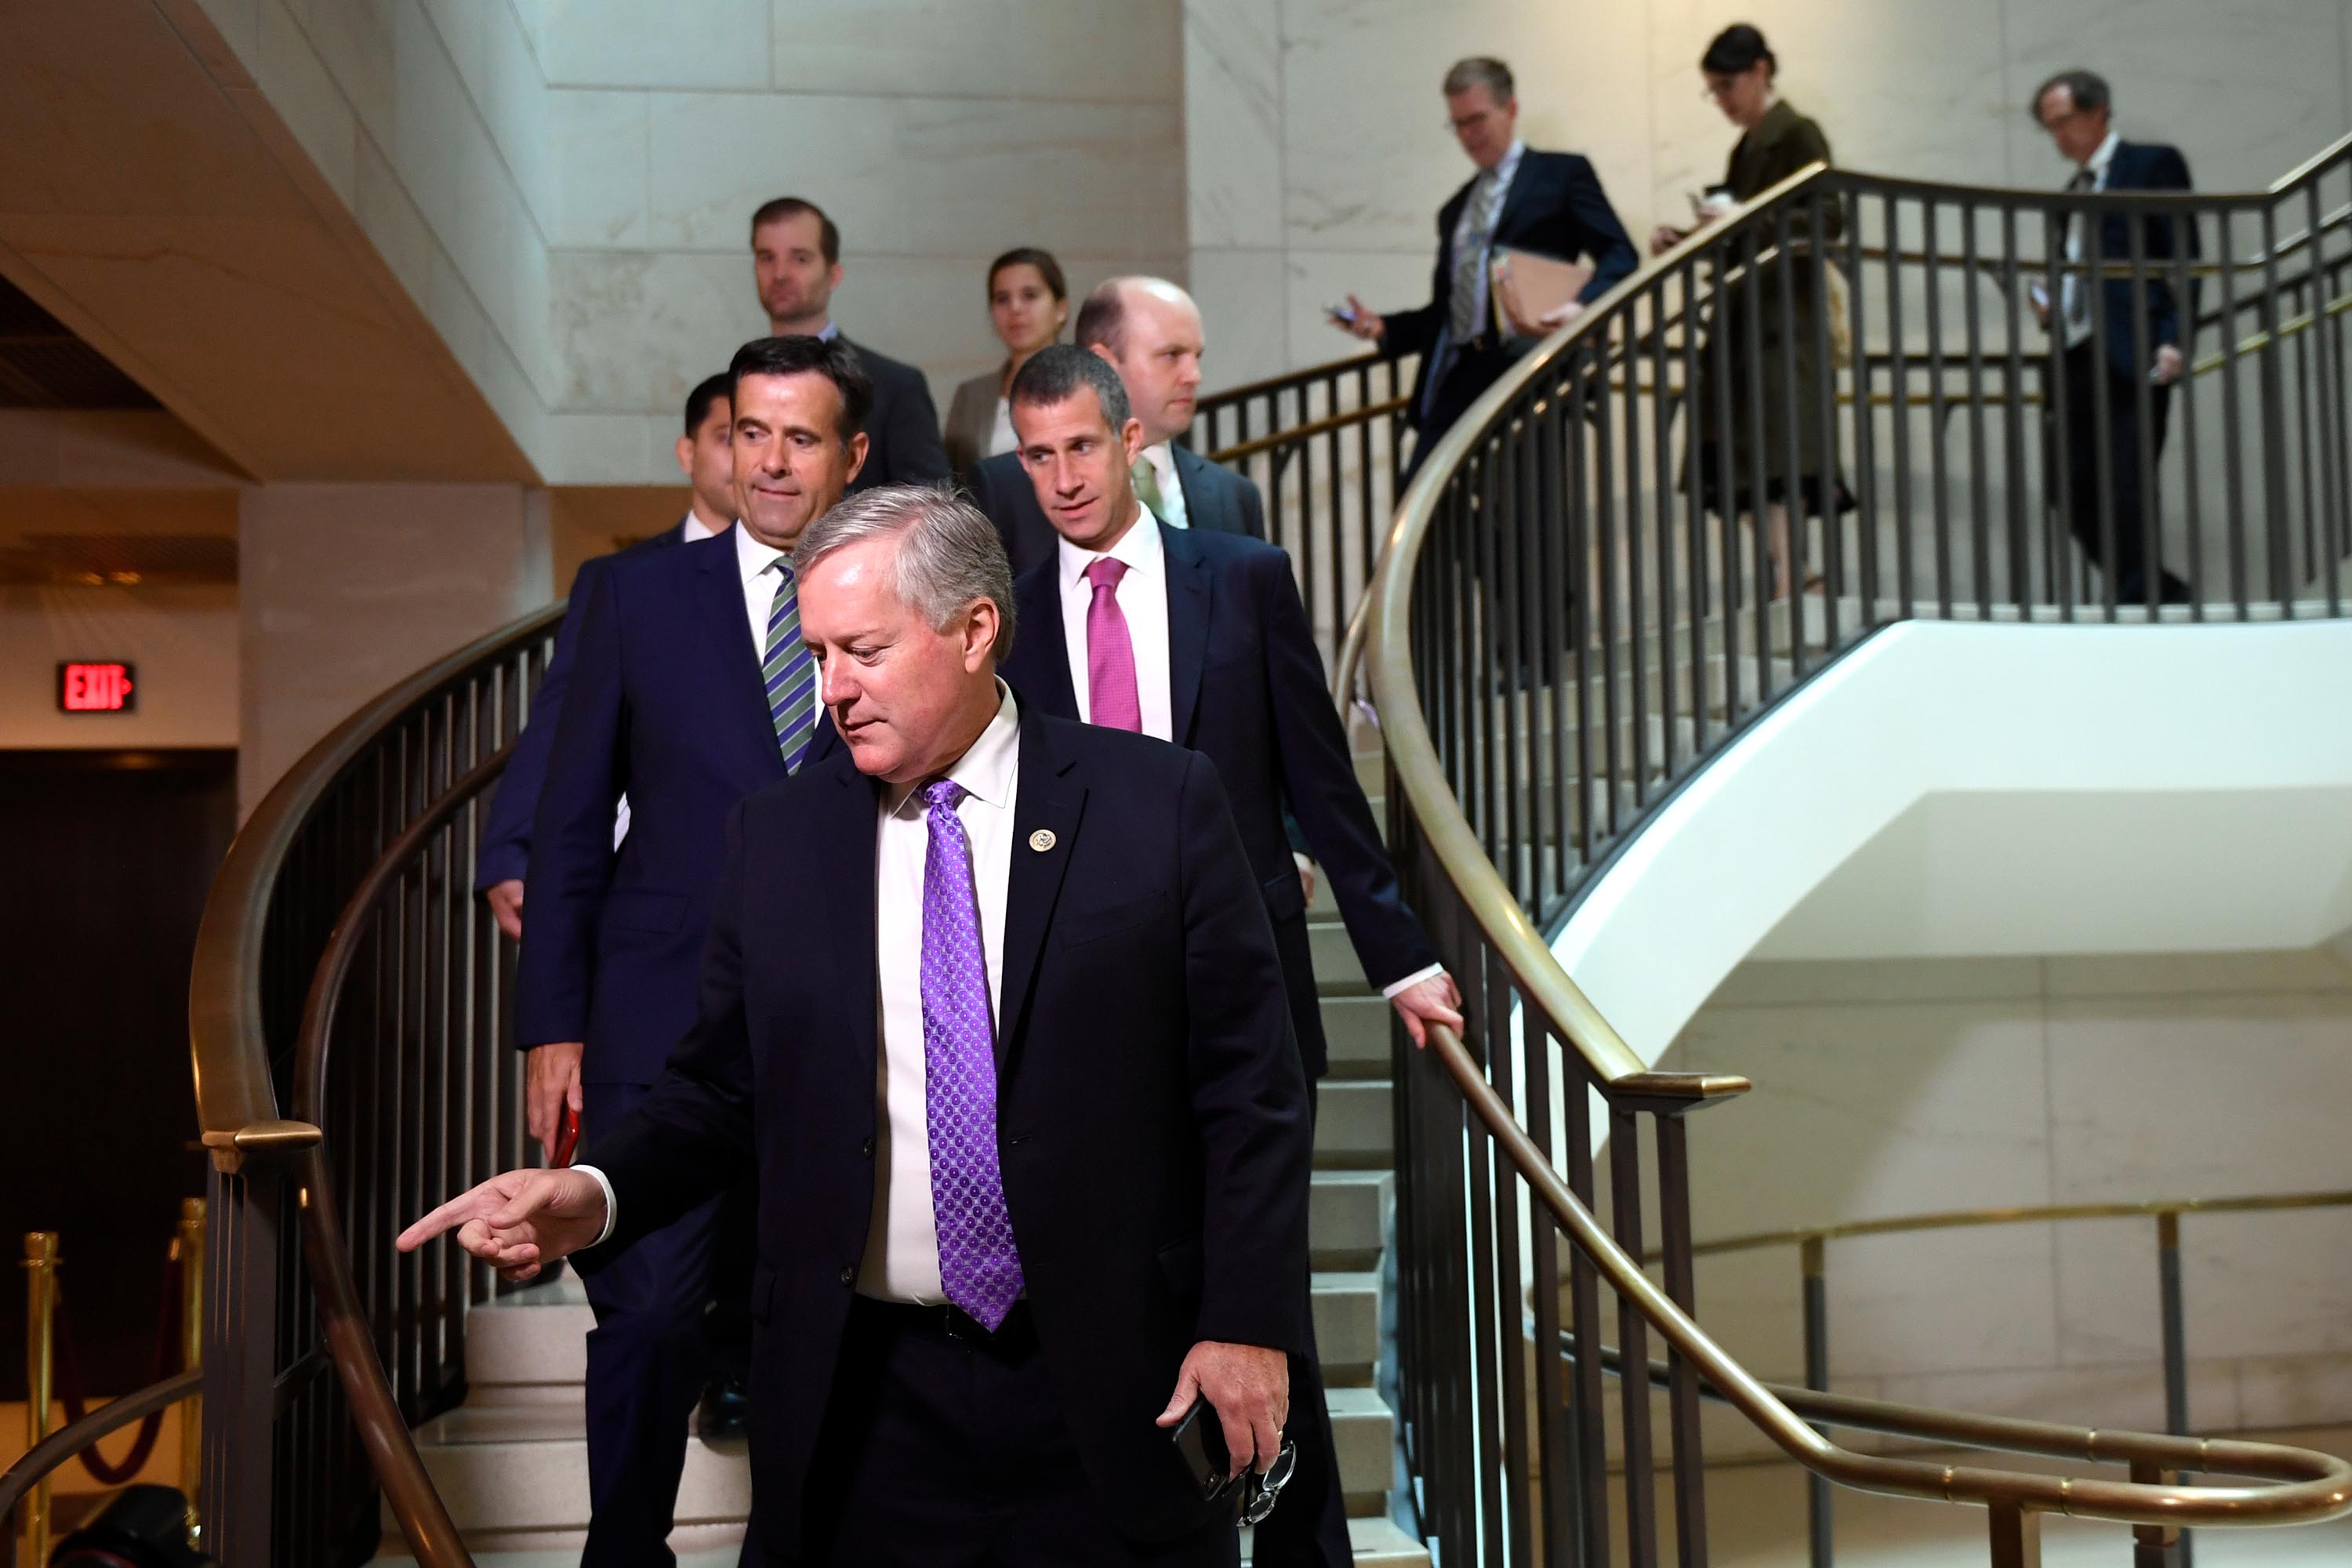 Rep. Mark Meadows and other Republicans arrive for a closed-door meeting on Capitol Hill in Washington.